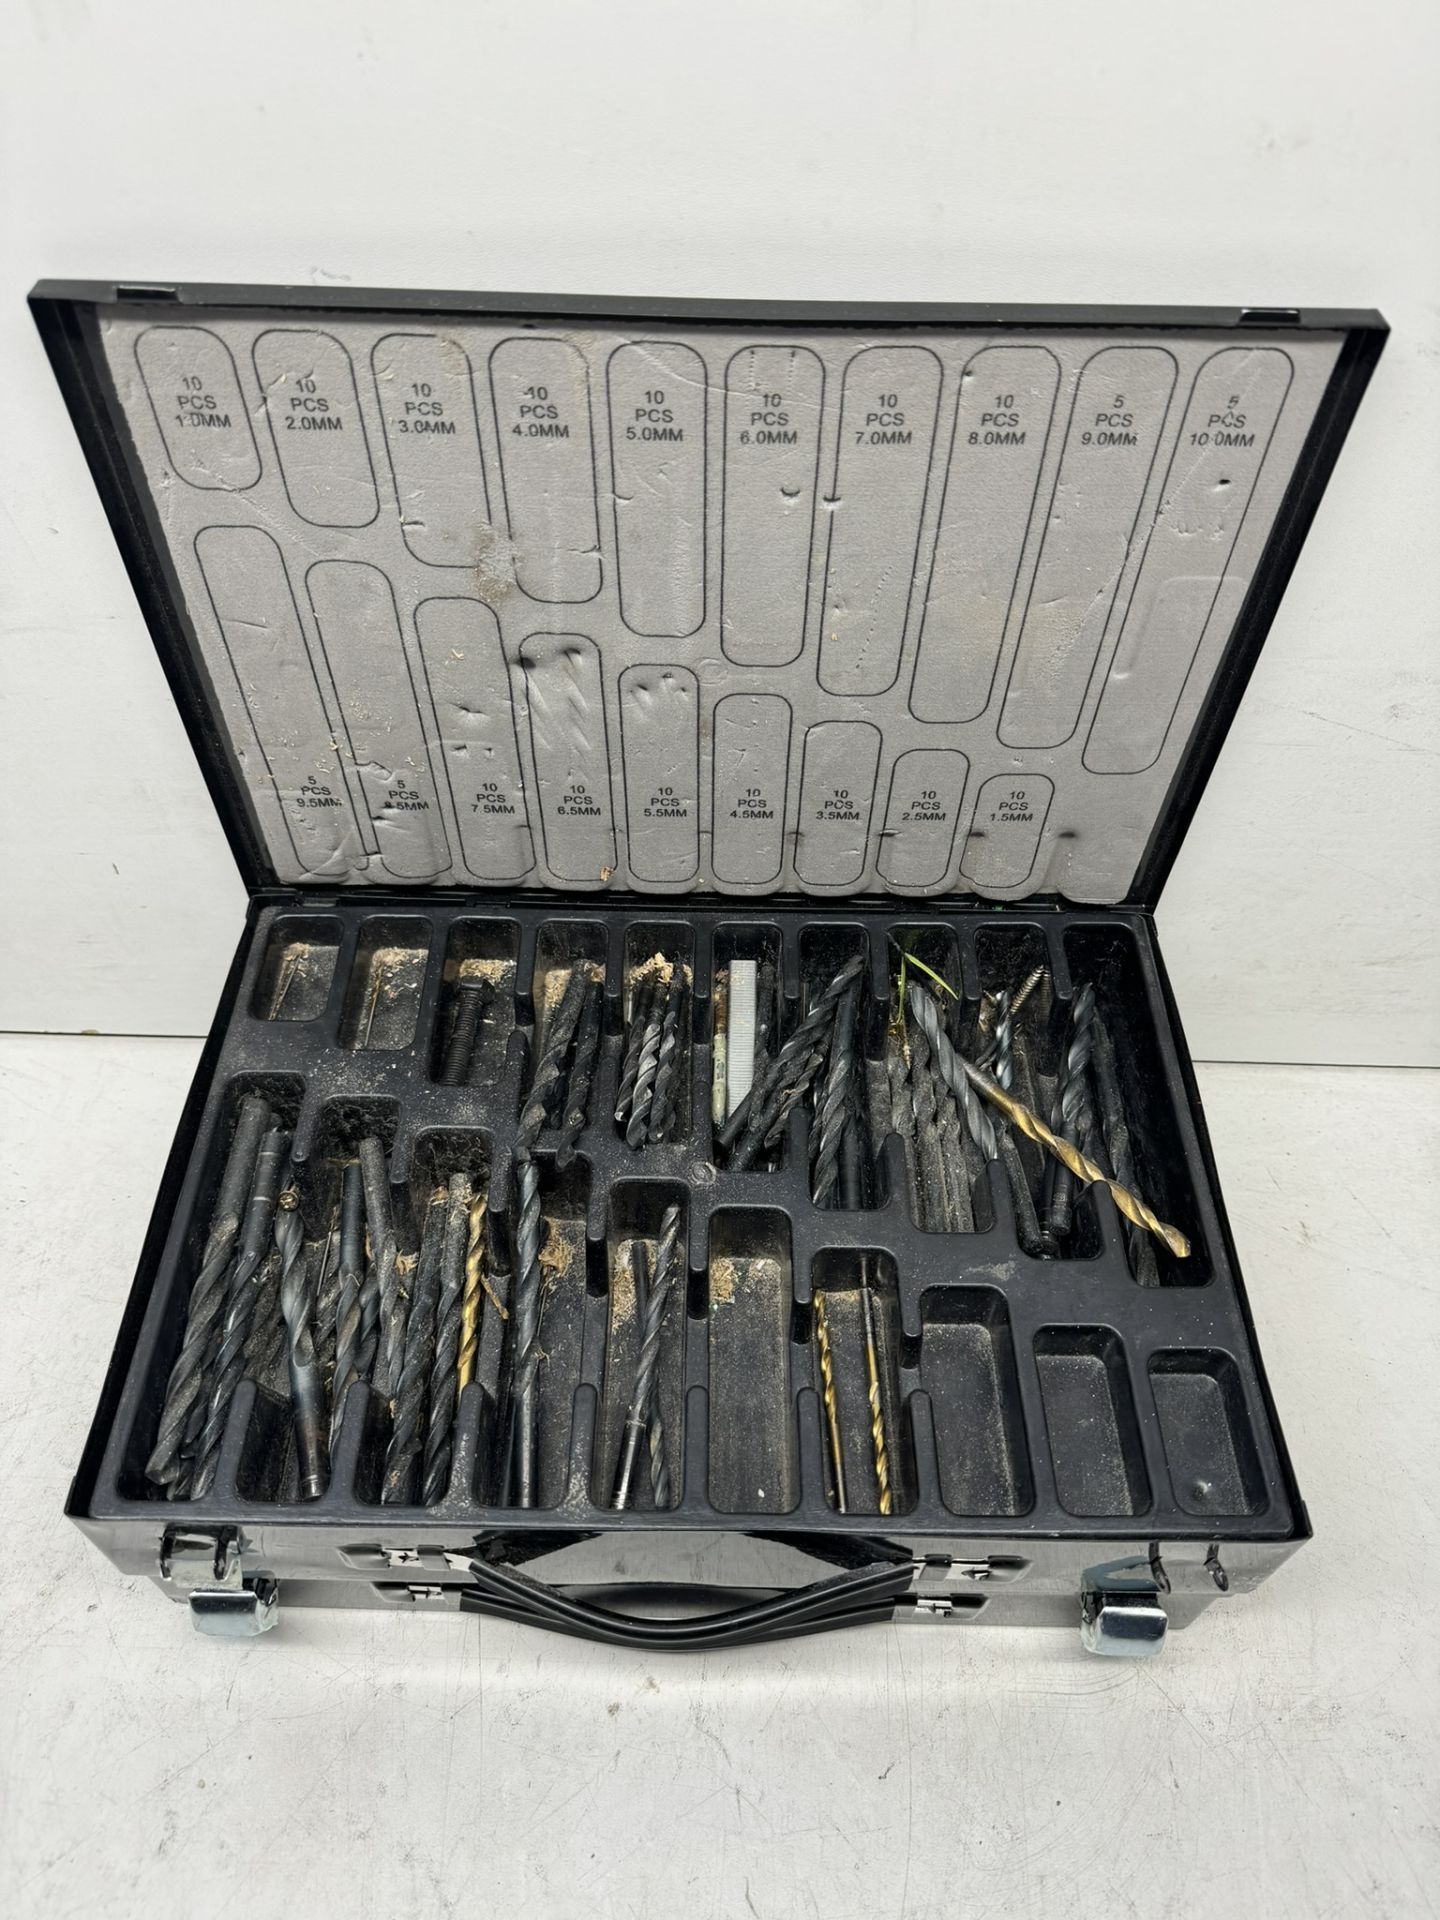 2 x Incomplete Drill Bit Sets With Case As Seen In Photos - Image 2 of 5